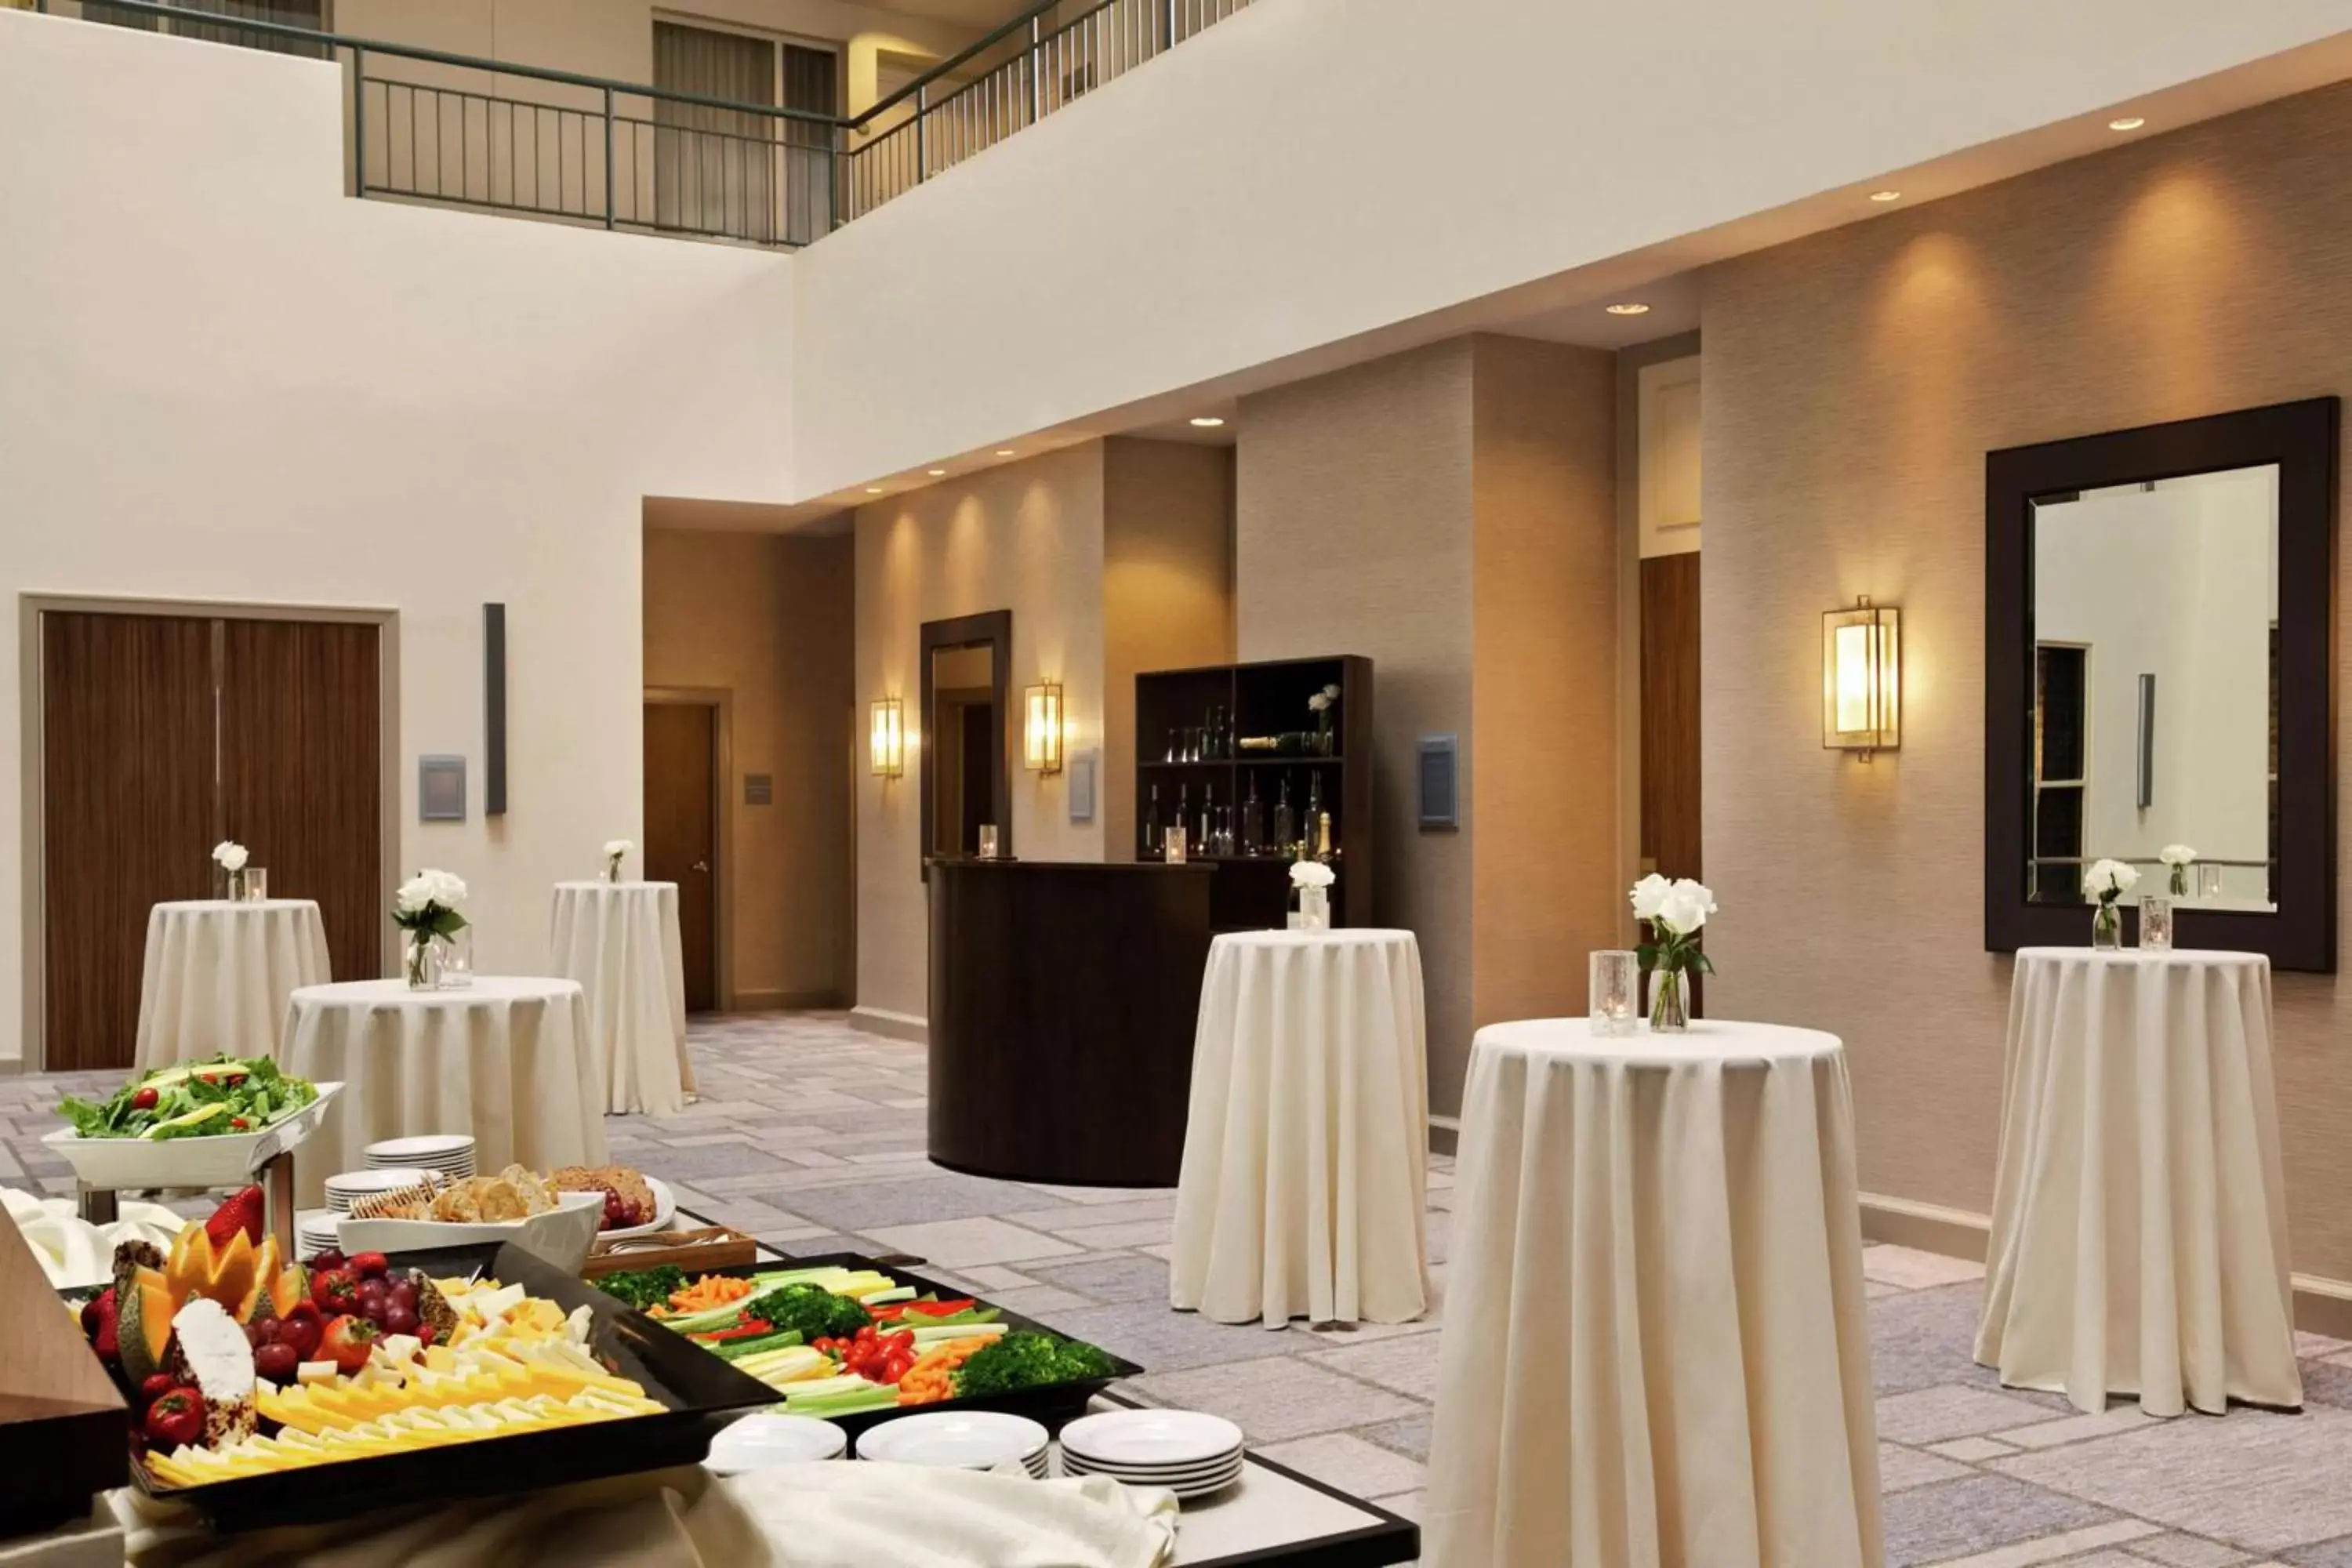 Meeting/conference room in DoubleTree Suites by Hilton Hotel Boston - Cambridge